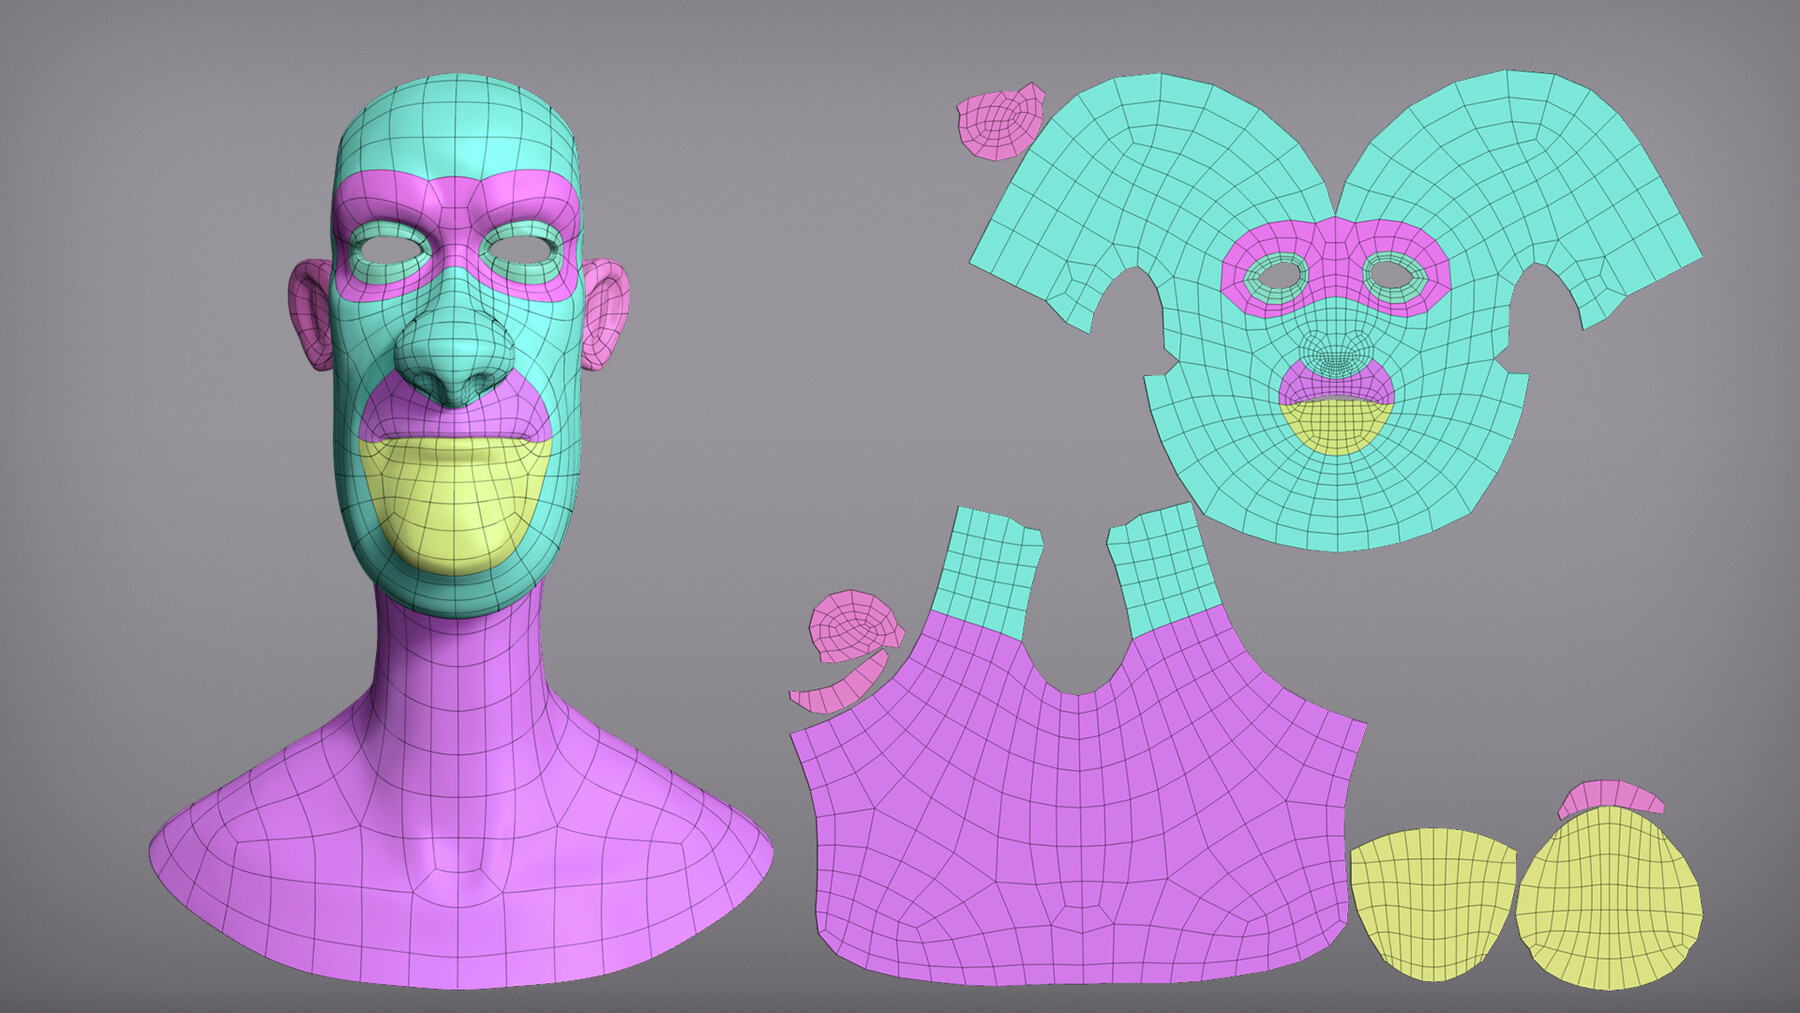 ArtStation - Cartoon male character Dave base mesh | Resources